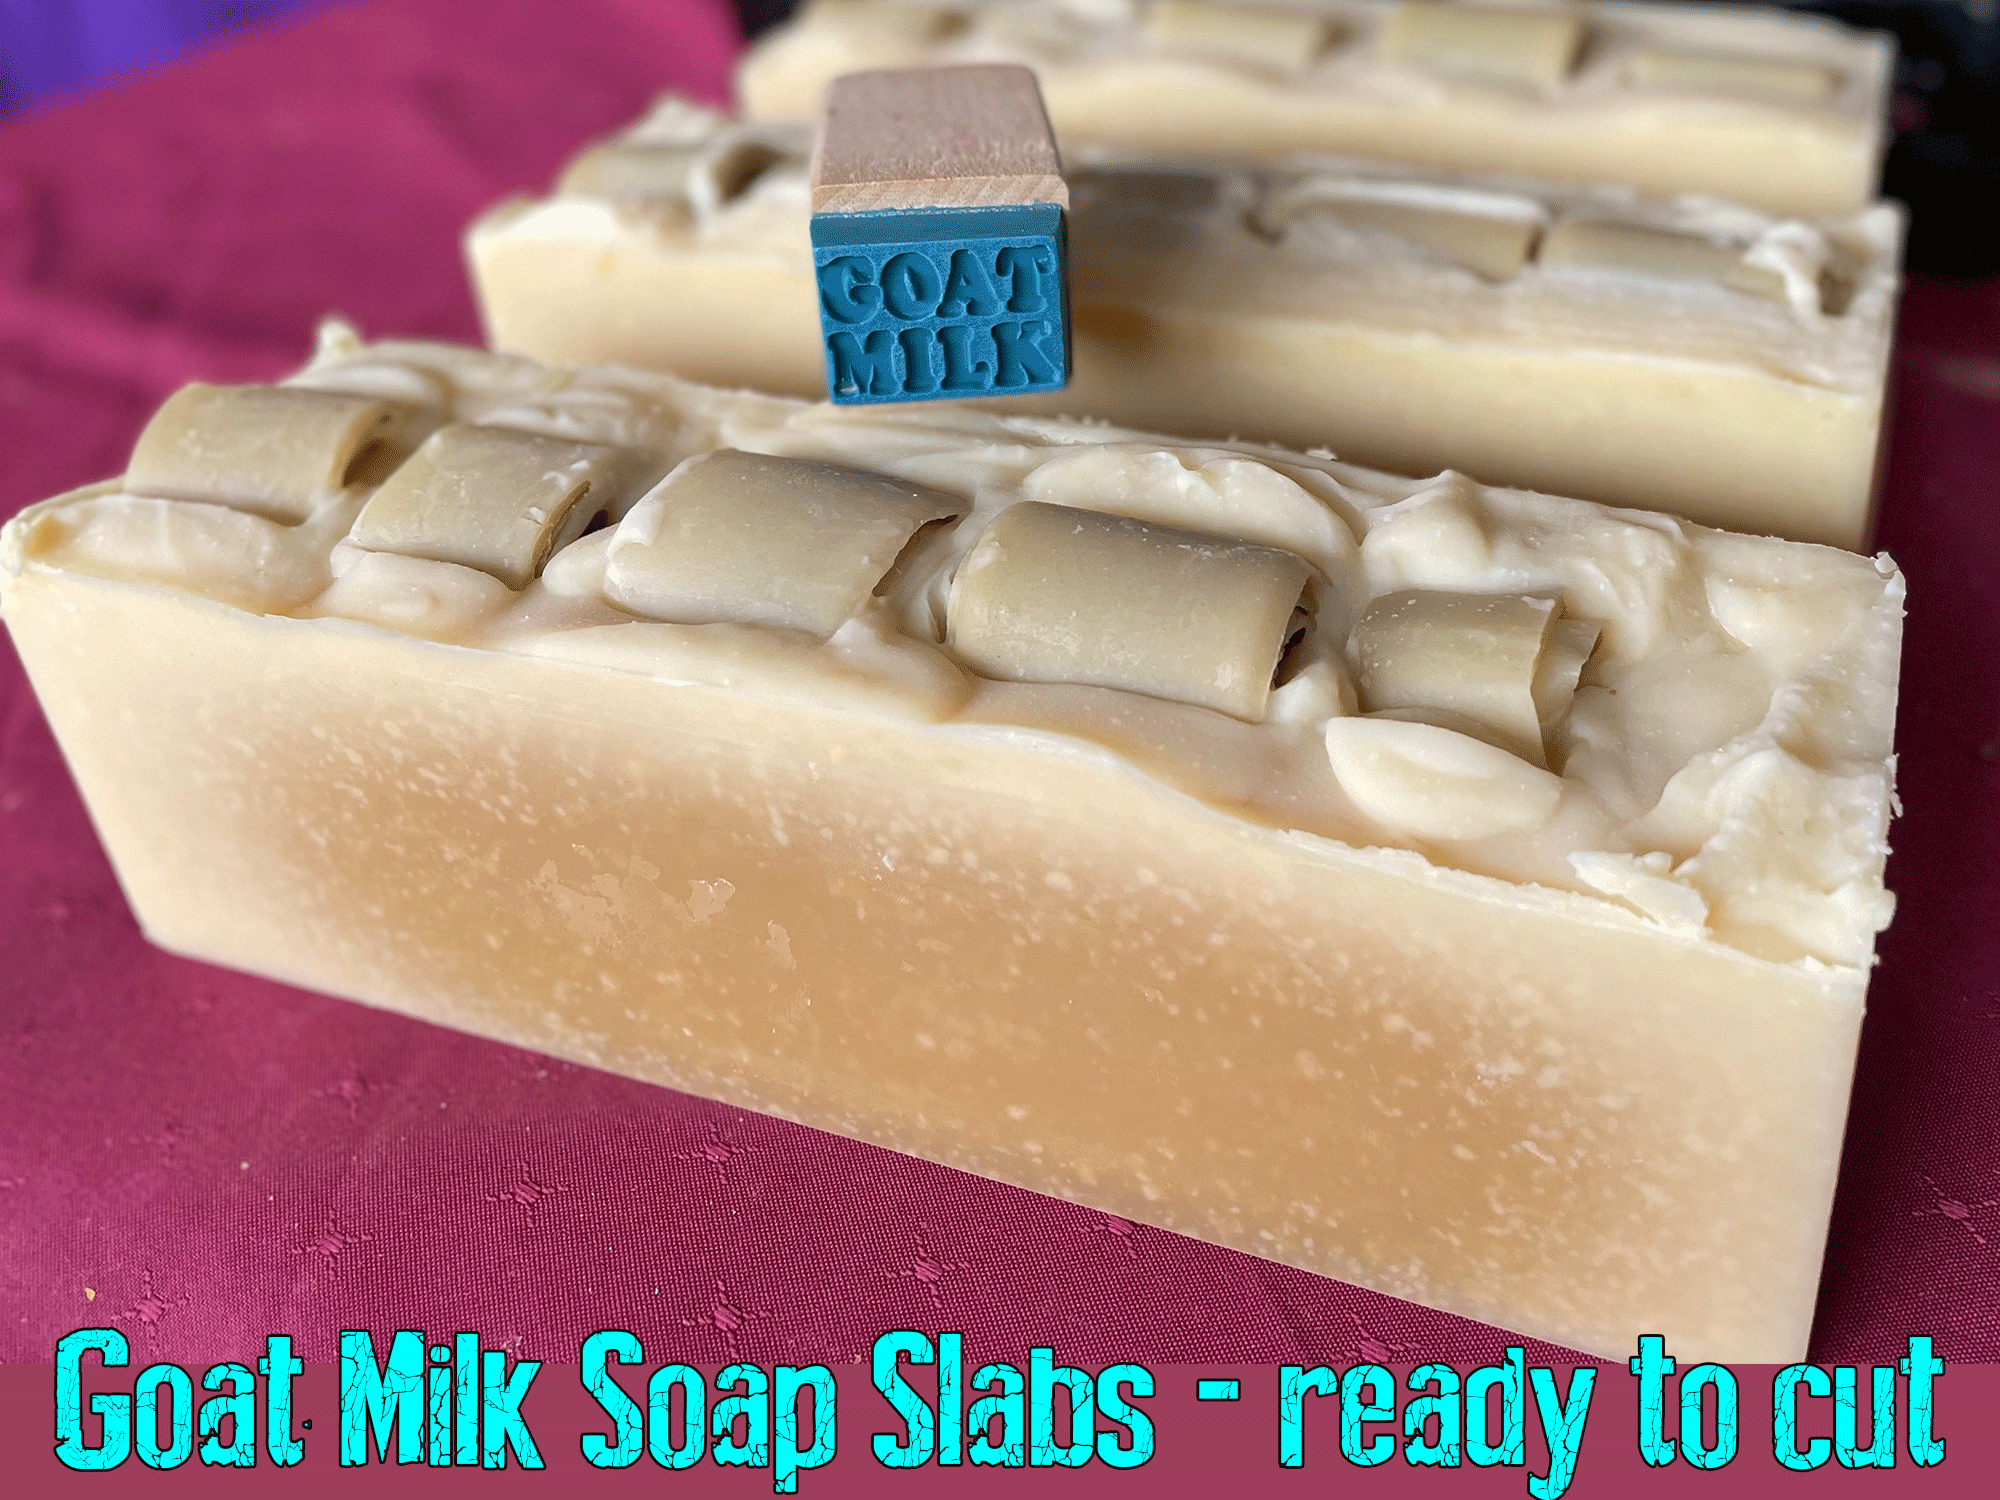 Goat Milk Soap Slabs are ready to cut